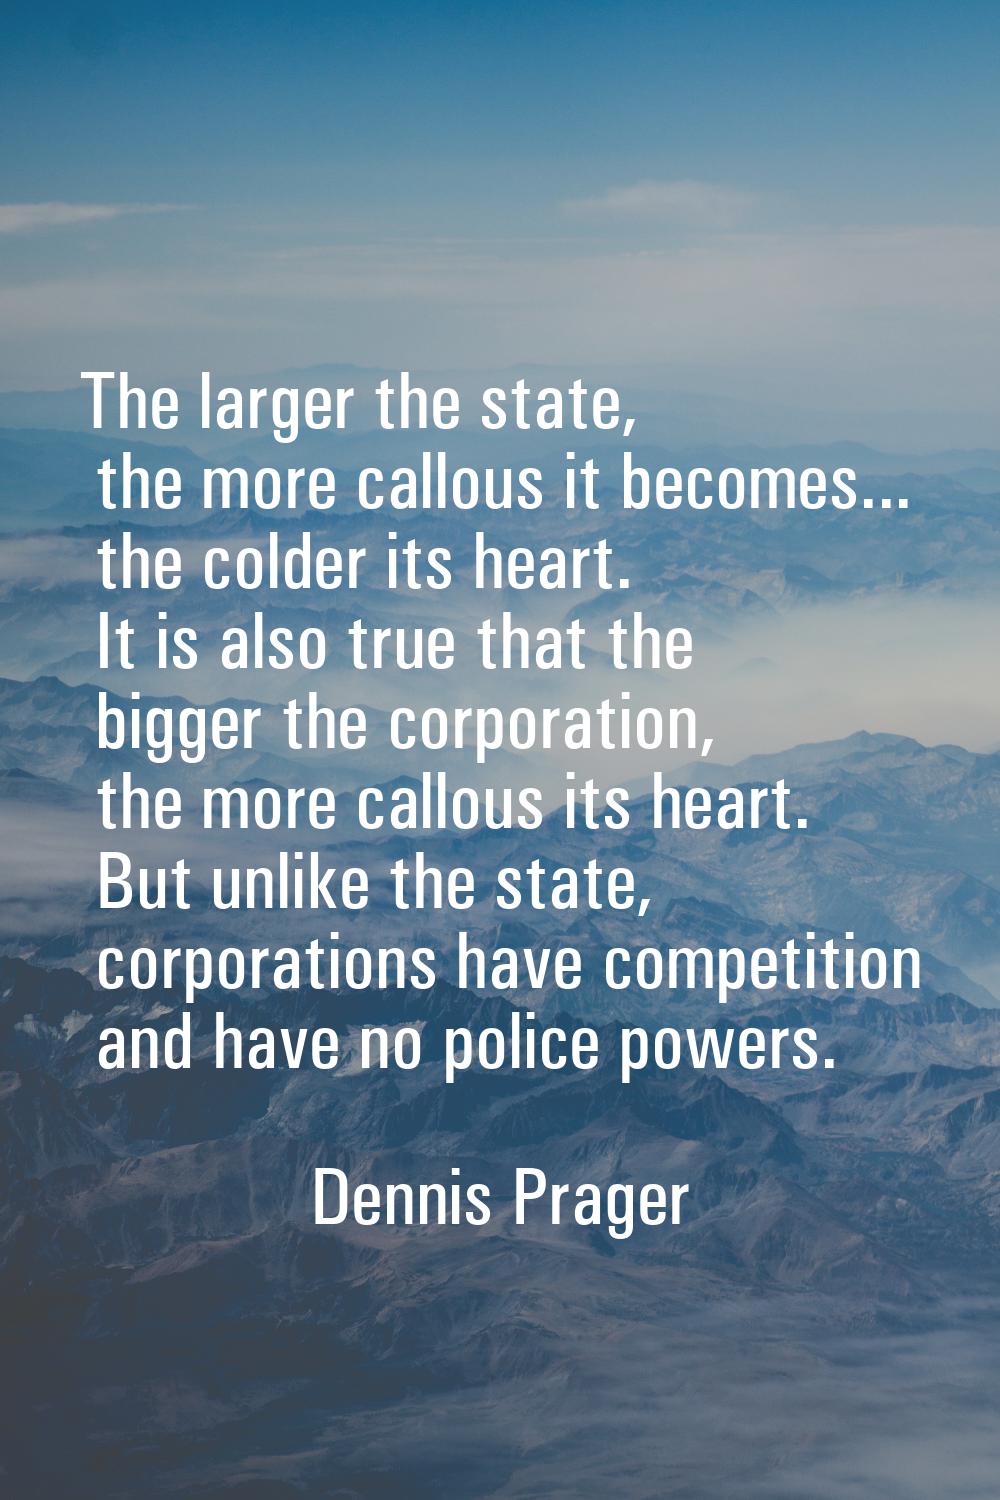 The larger the state, the more callous it becomes... the colder its heart. It is also true that the